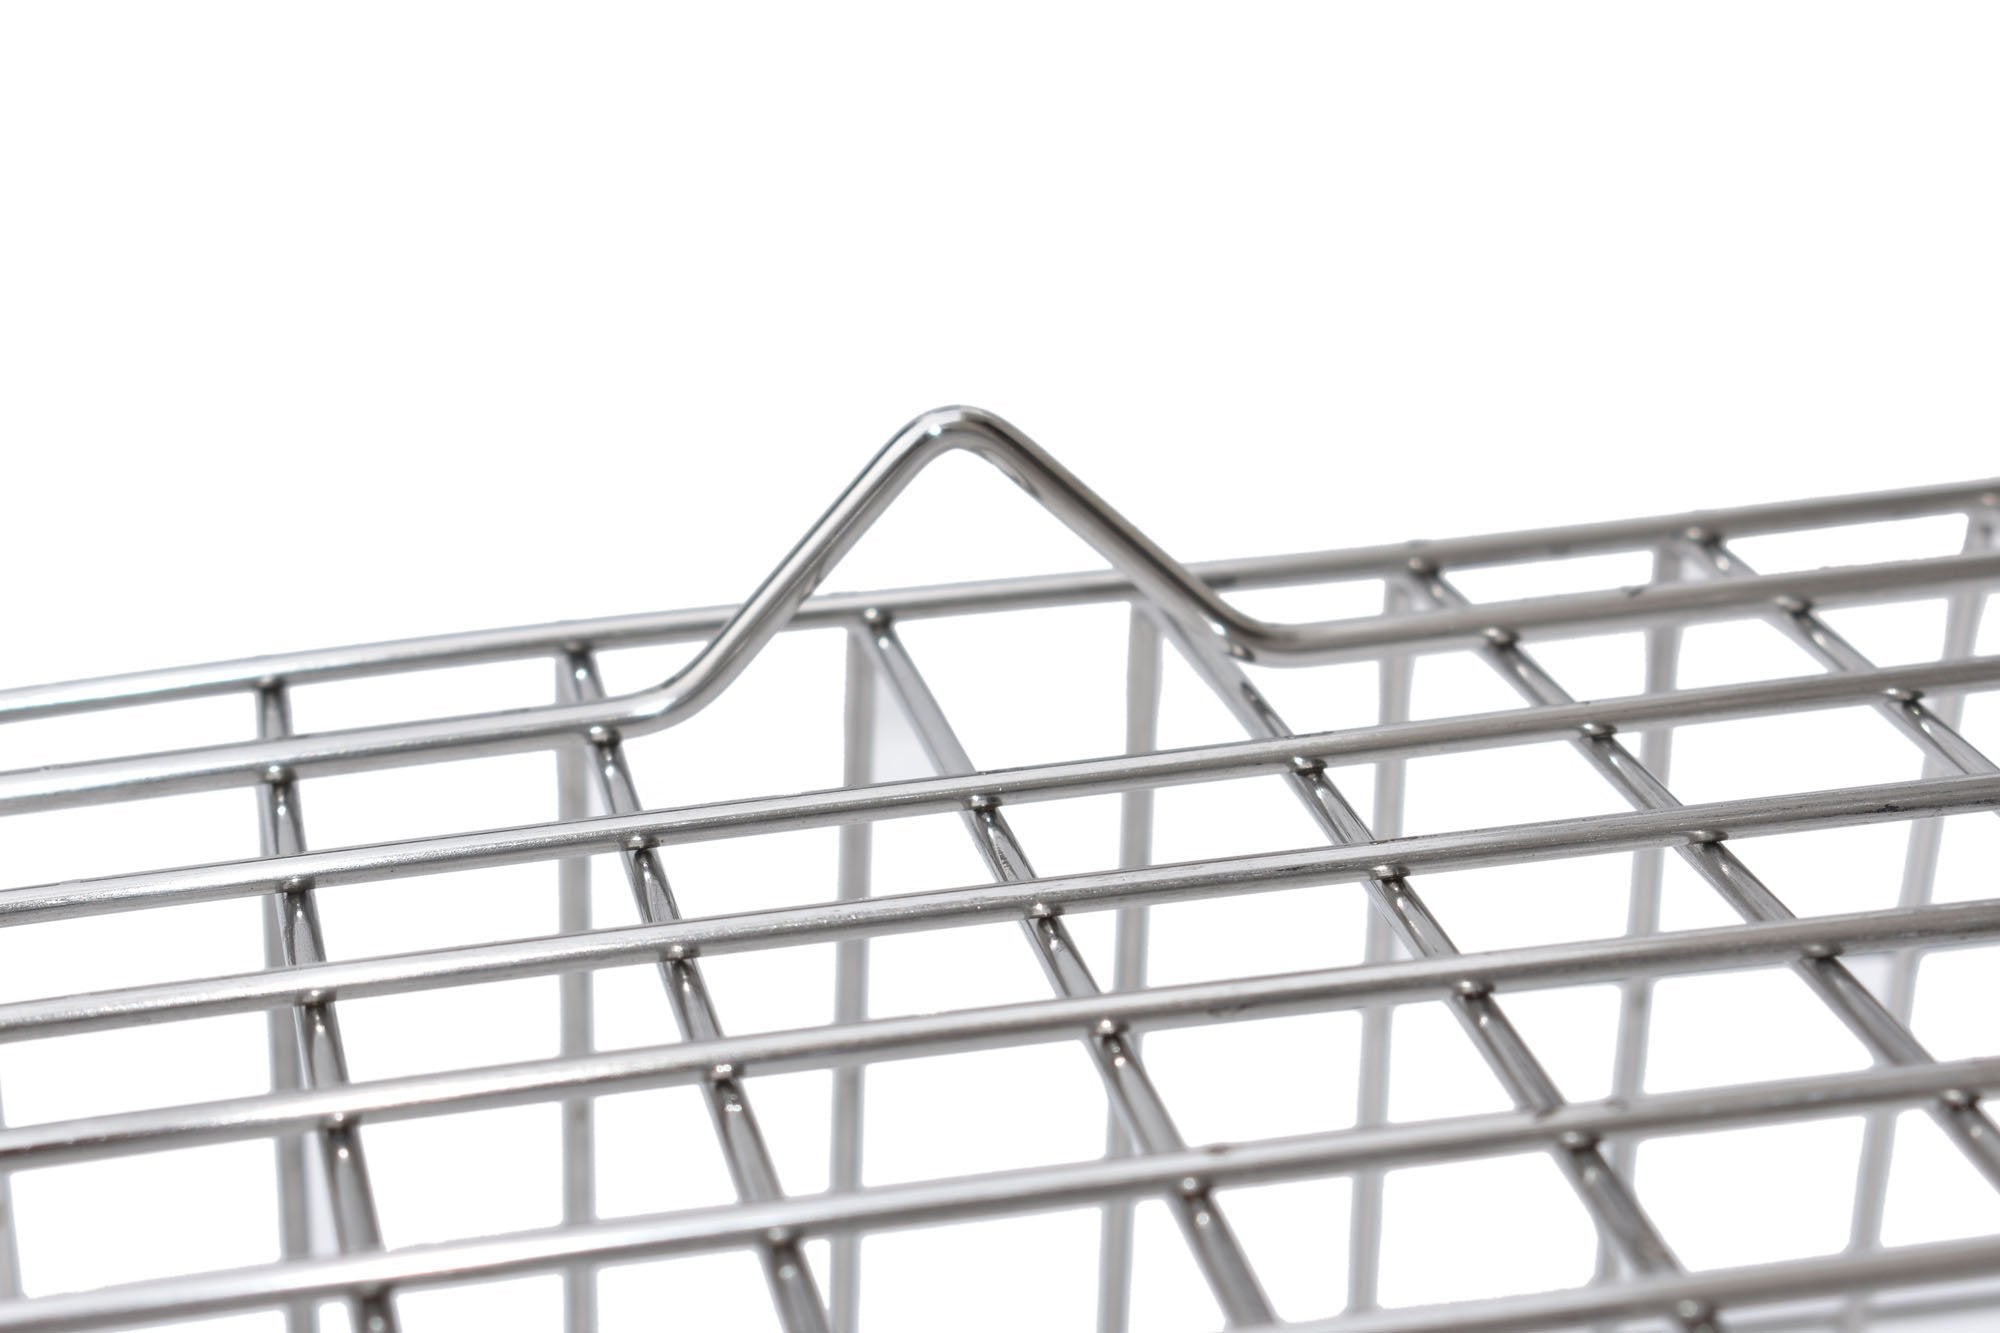 Planet Stainless-Steel Heaviest Dish Drainer Basket for Kitchen Utensils/Dish Drying Rack/Plate Stand/Bartan Basket (Size-54x42x20cm)